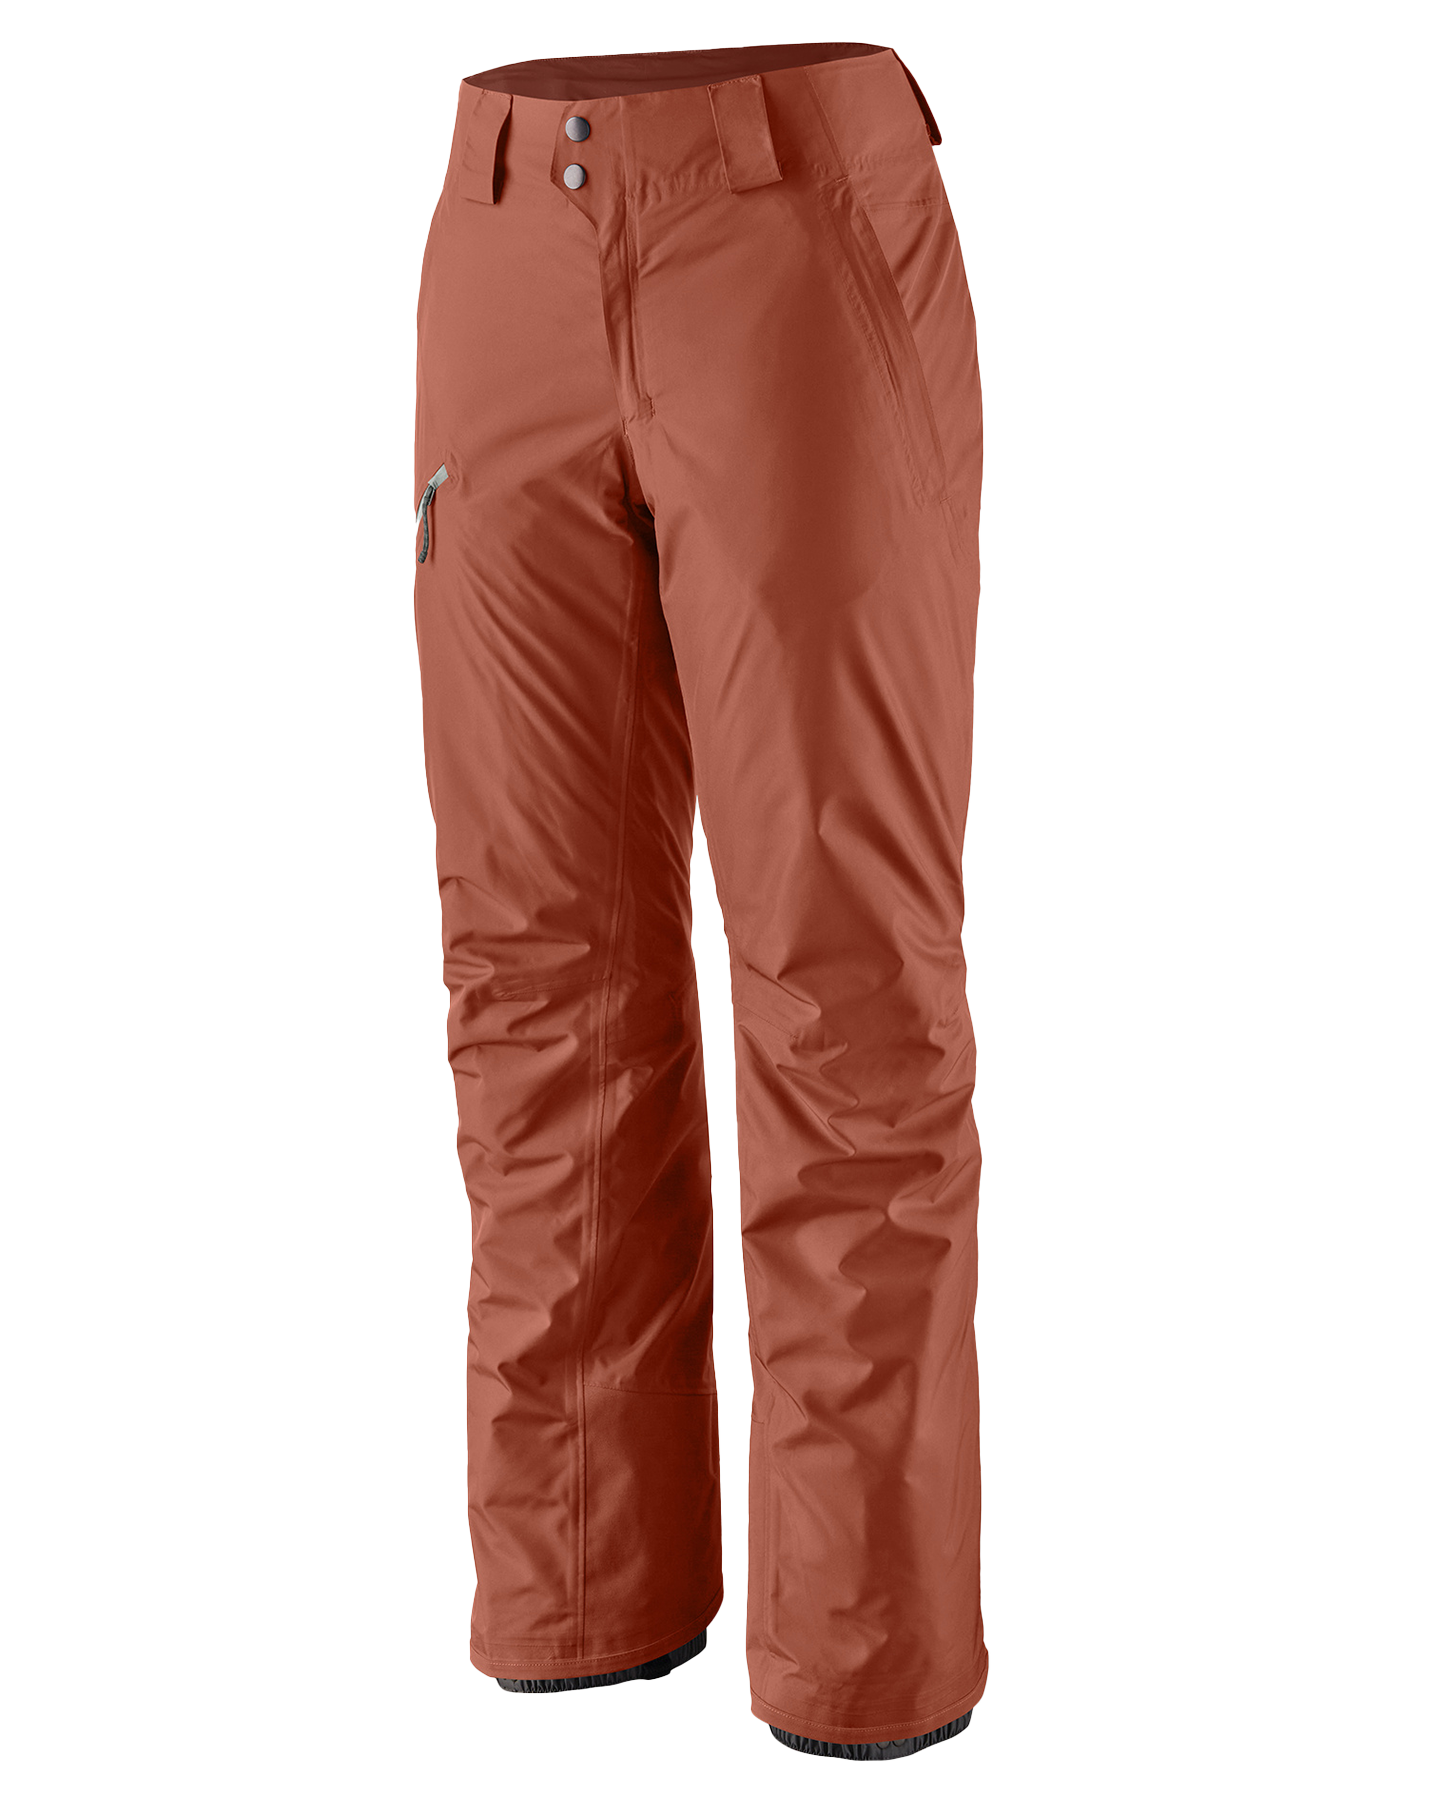 Patagonia Insulated Powder Town Women's Snow Pants - Burl Red - 2024 Women's Snow Pants - SnowSkiersWarehouse